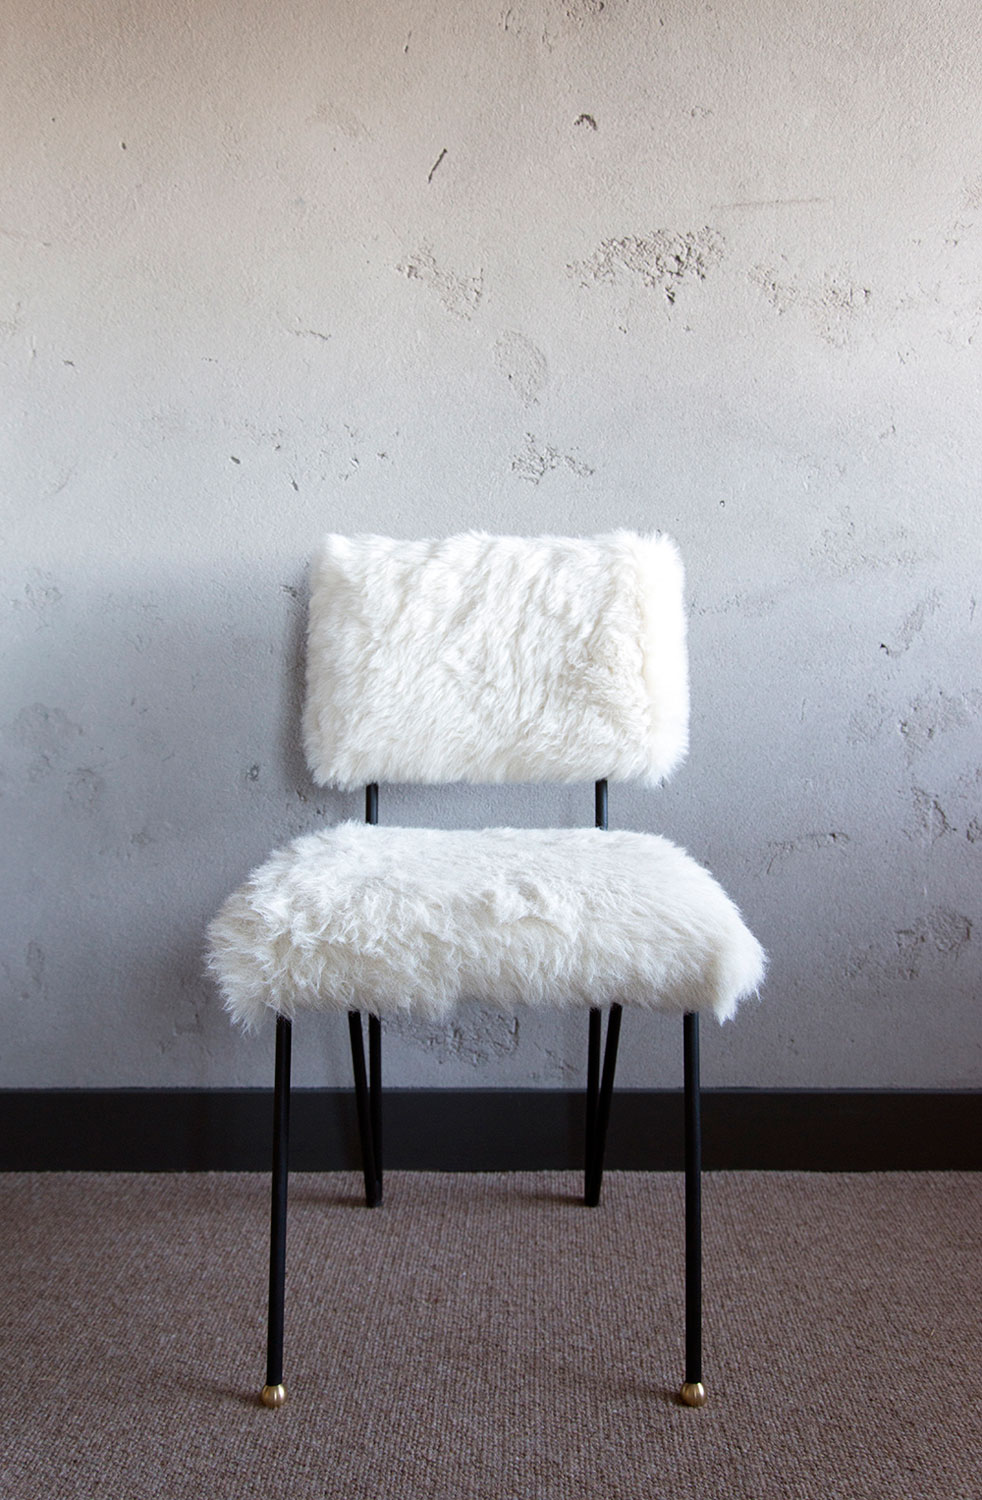 Furry chair made by Louis Berczi, shot by Lee Grant.